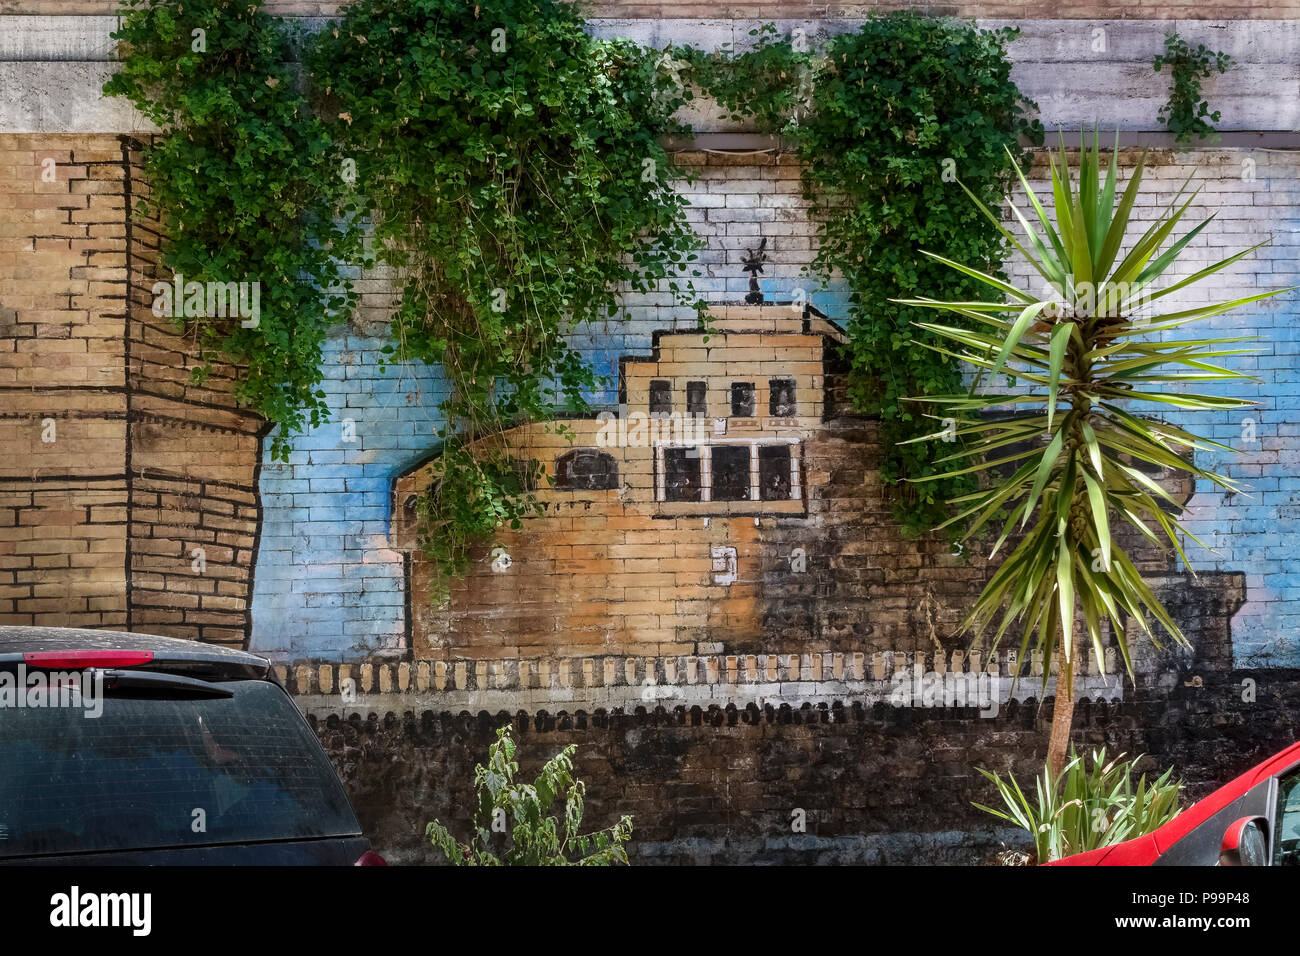 Glimpse of a street graffiti mural depicting Castle of the Holy Angel painted on a brick wall in an alley of Rome, Italy, Europe. Street art, close up Stock Photo